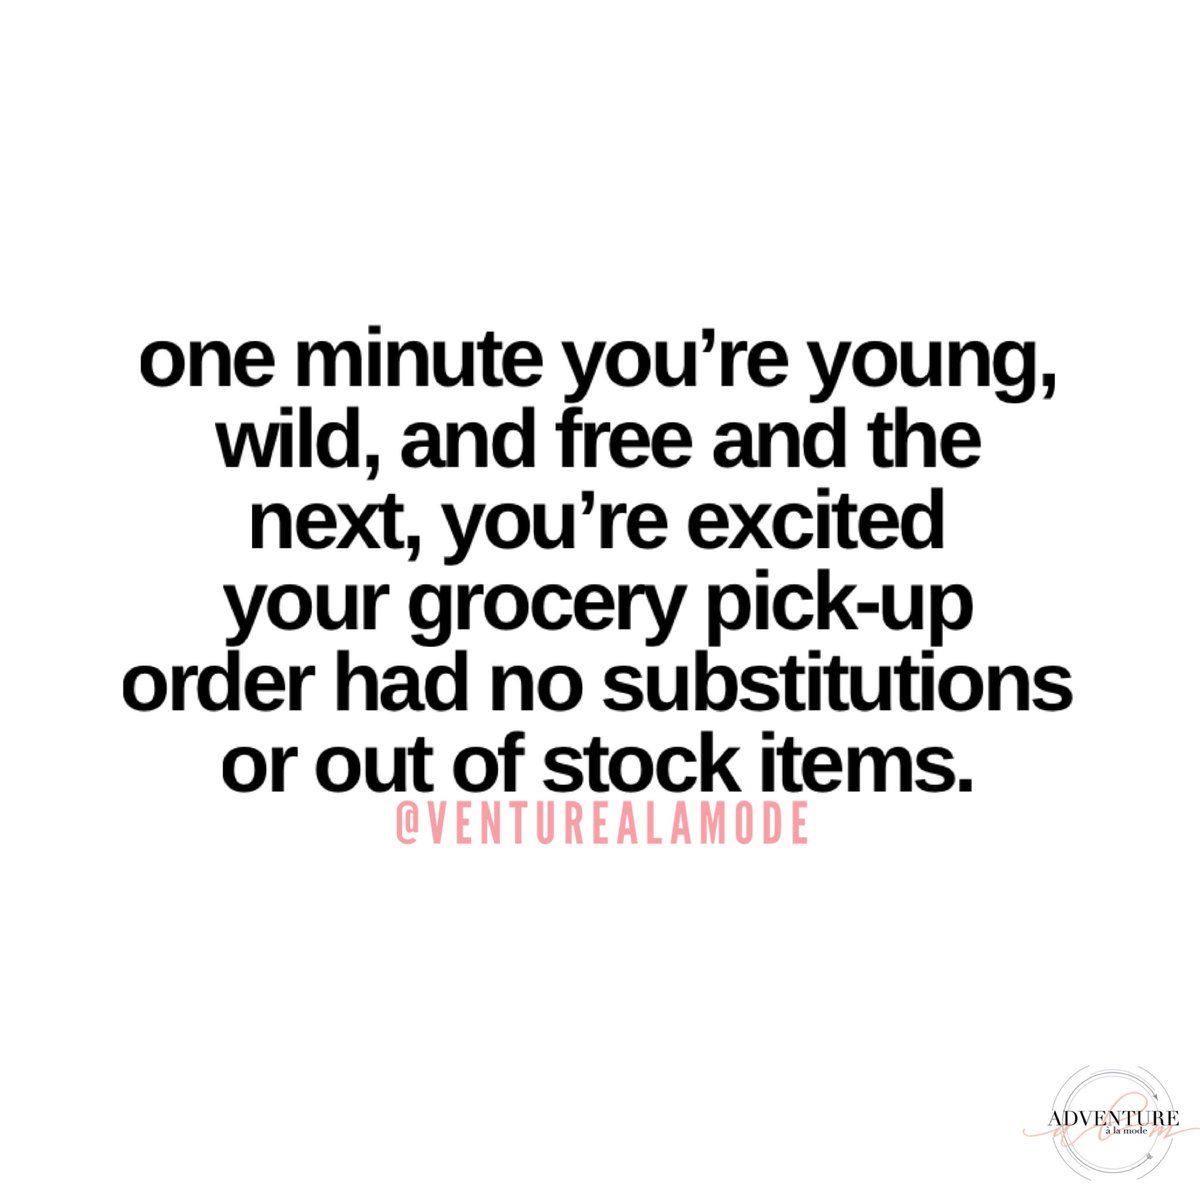 It really is the best though… 👏🏼 #relatable #grocery #grocerypickup #walmart #walmartpickup #groceryshop #adulting